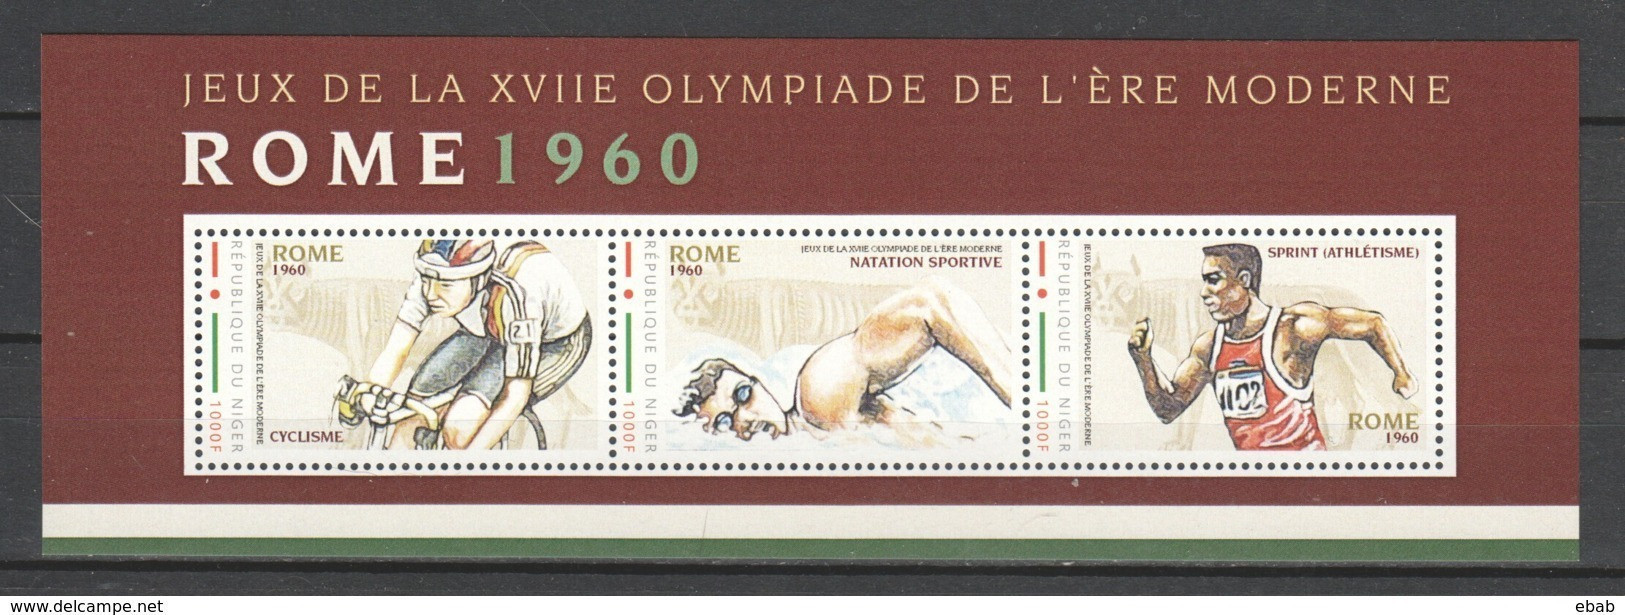 Nigeria - MNH Set Of 2 Sheets SUMMER OLYMPICS ROME 1960 - Sommer 1960: Rom